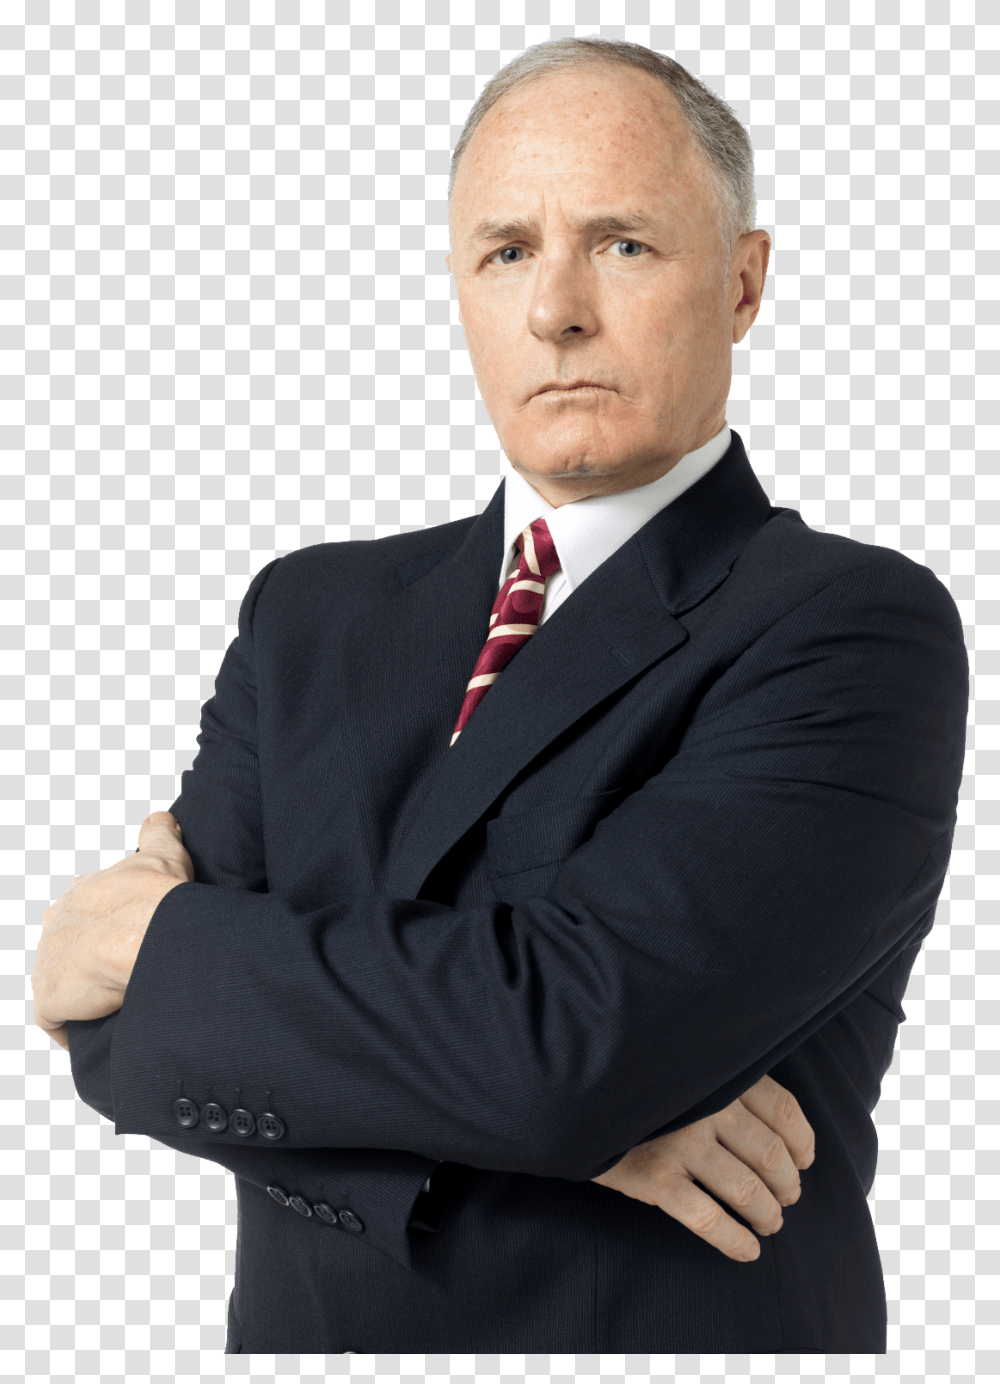 Angry Person Men Without Socks Meme, Tie, Accessories, Suit Transparent Png